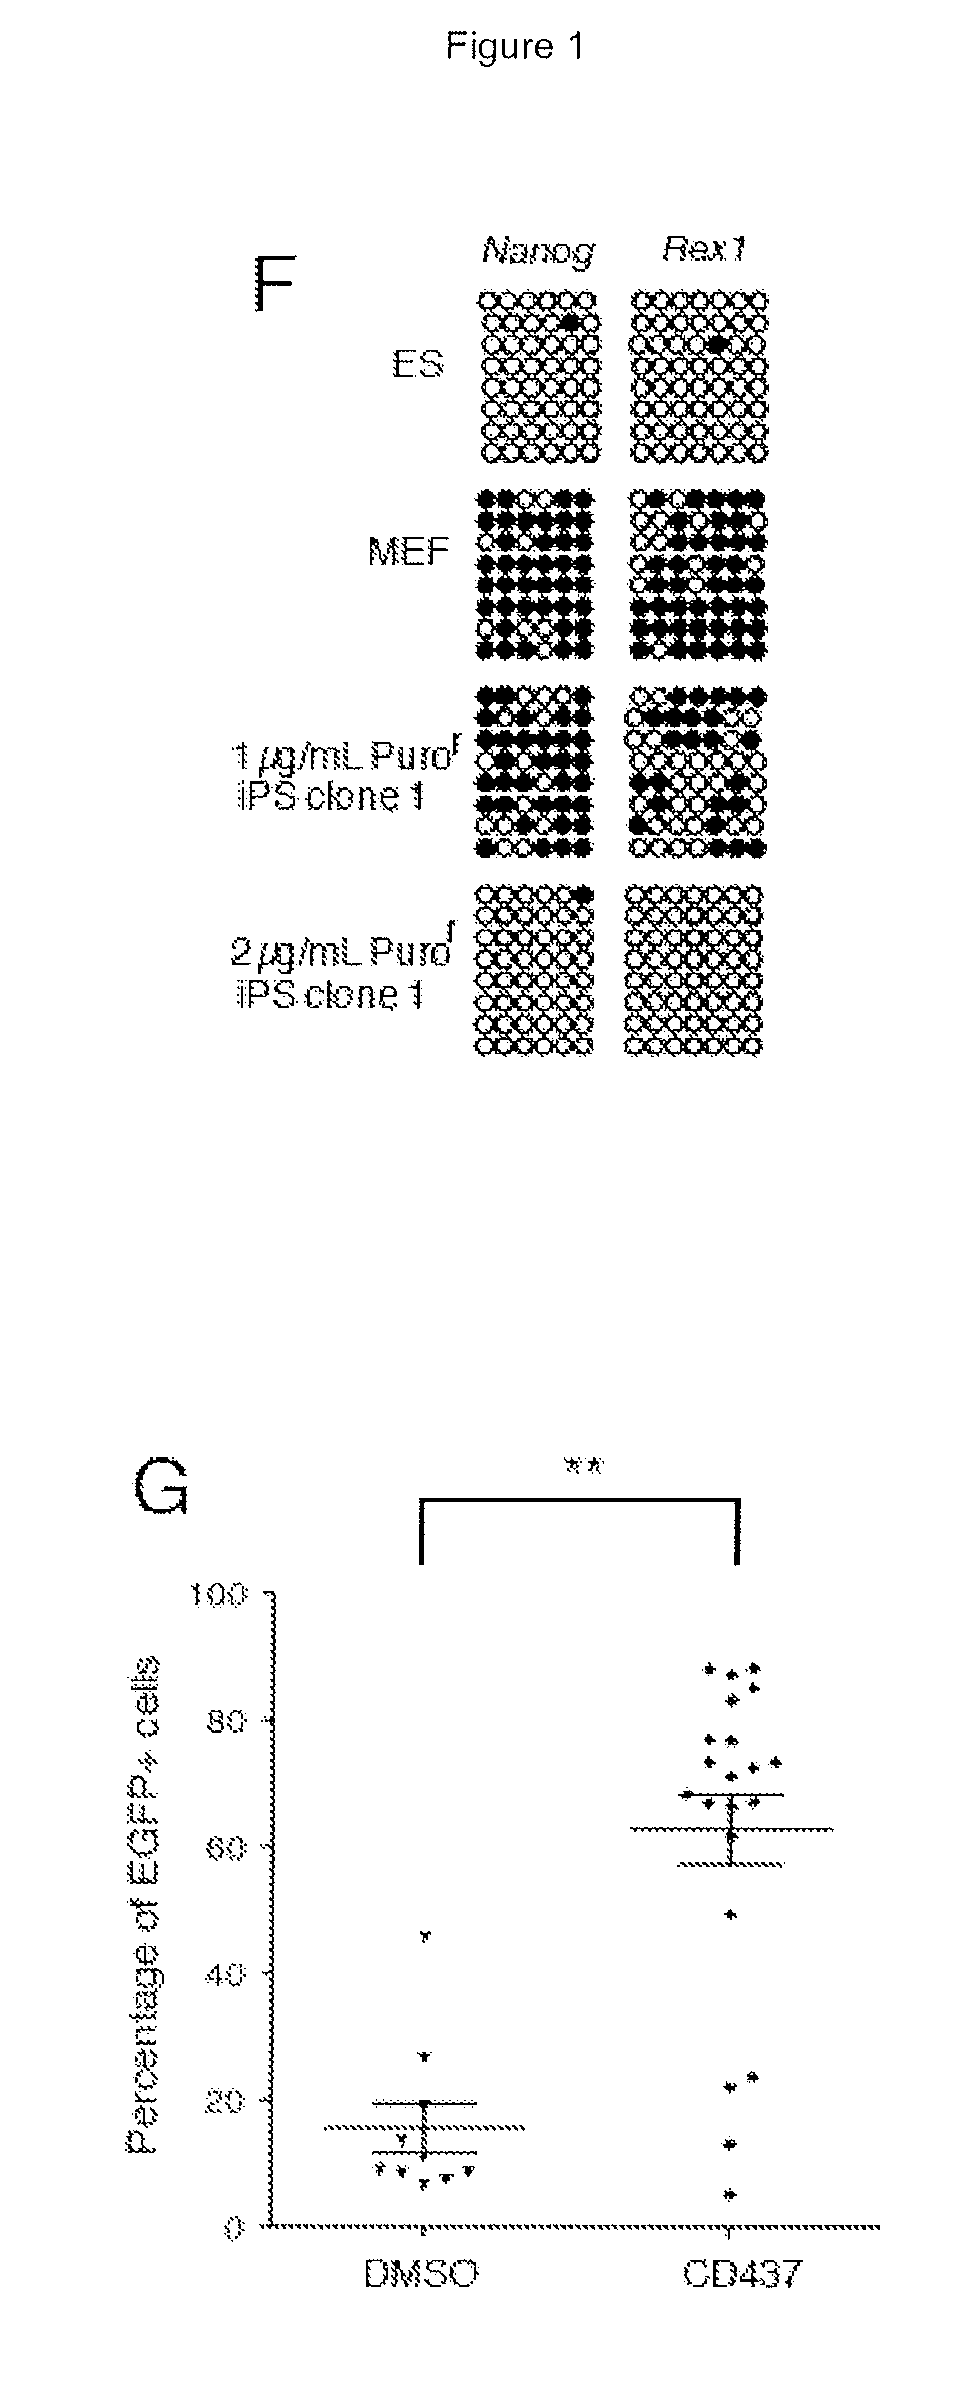 Cells and methods for obtaining them